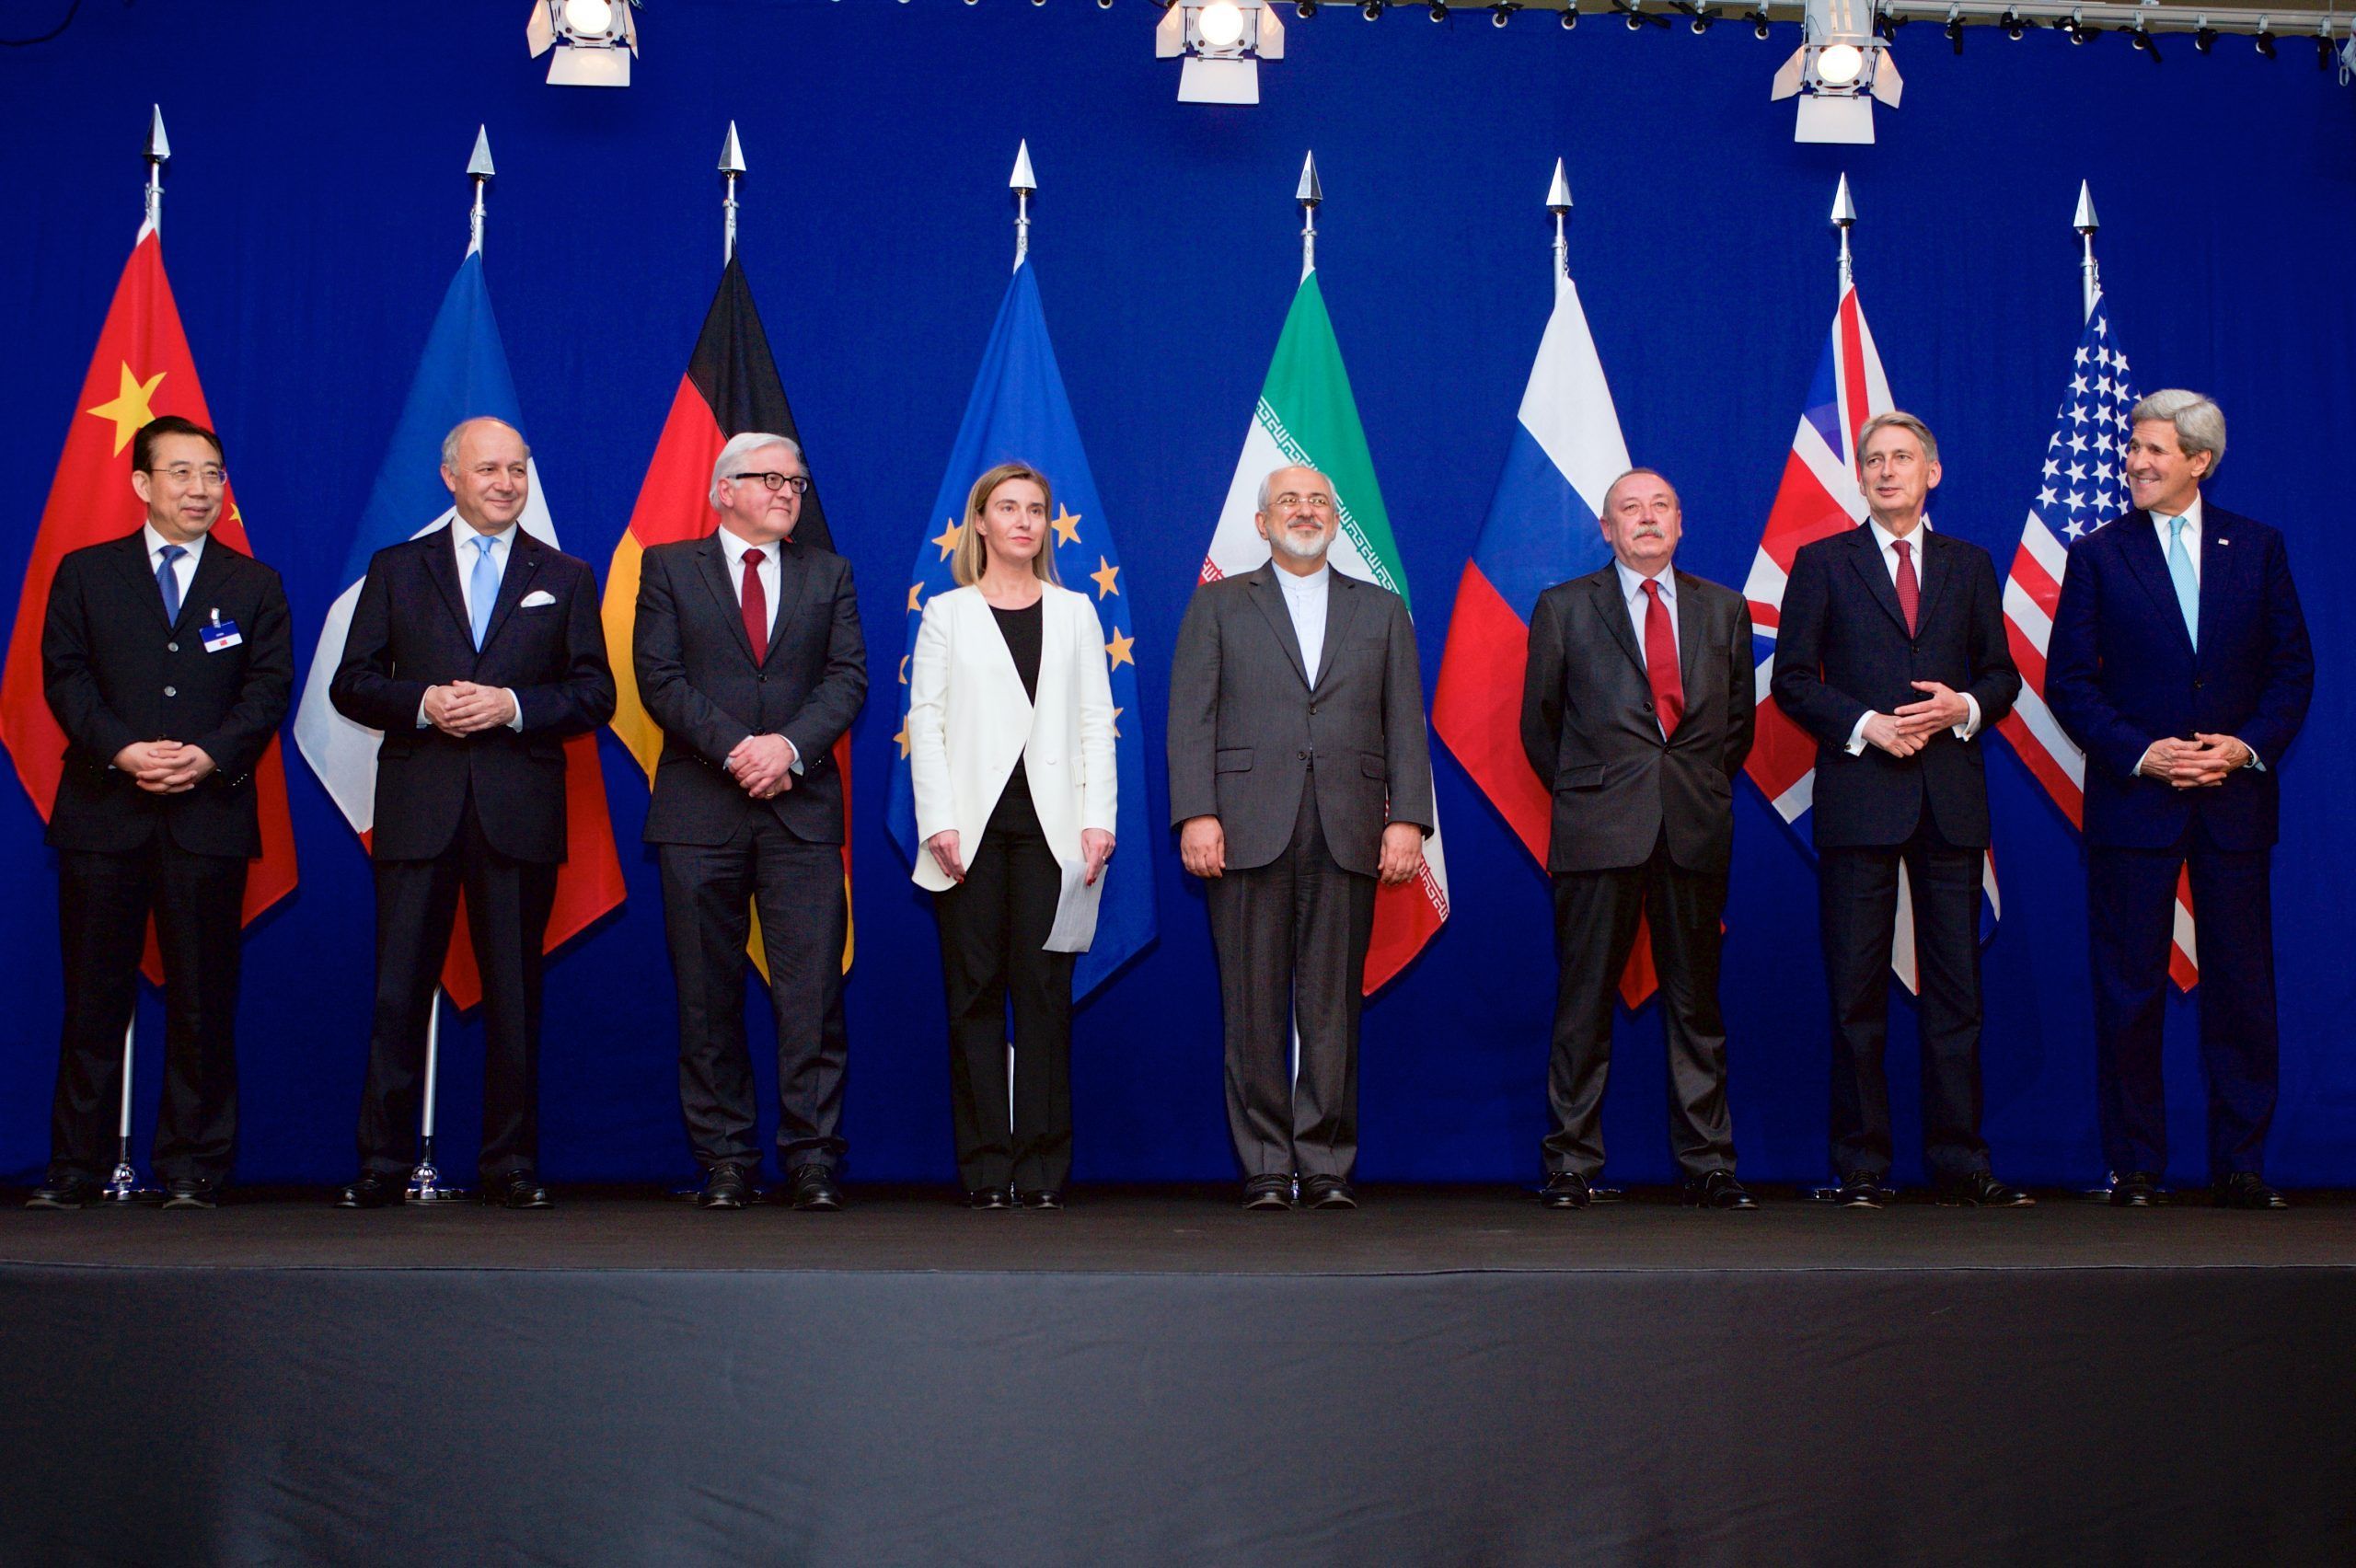 Negotiations_about_Iranian_Nuclear_Program_-_the_Ministers_of_Foreign_Affairs_and_Other_Officials_of_the_P51_and_Ministers_of_Foreign_Affairs_of_Iran_and_EU_in_Lausanne-scaled